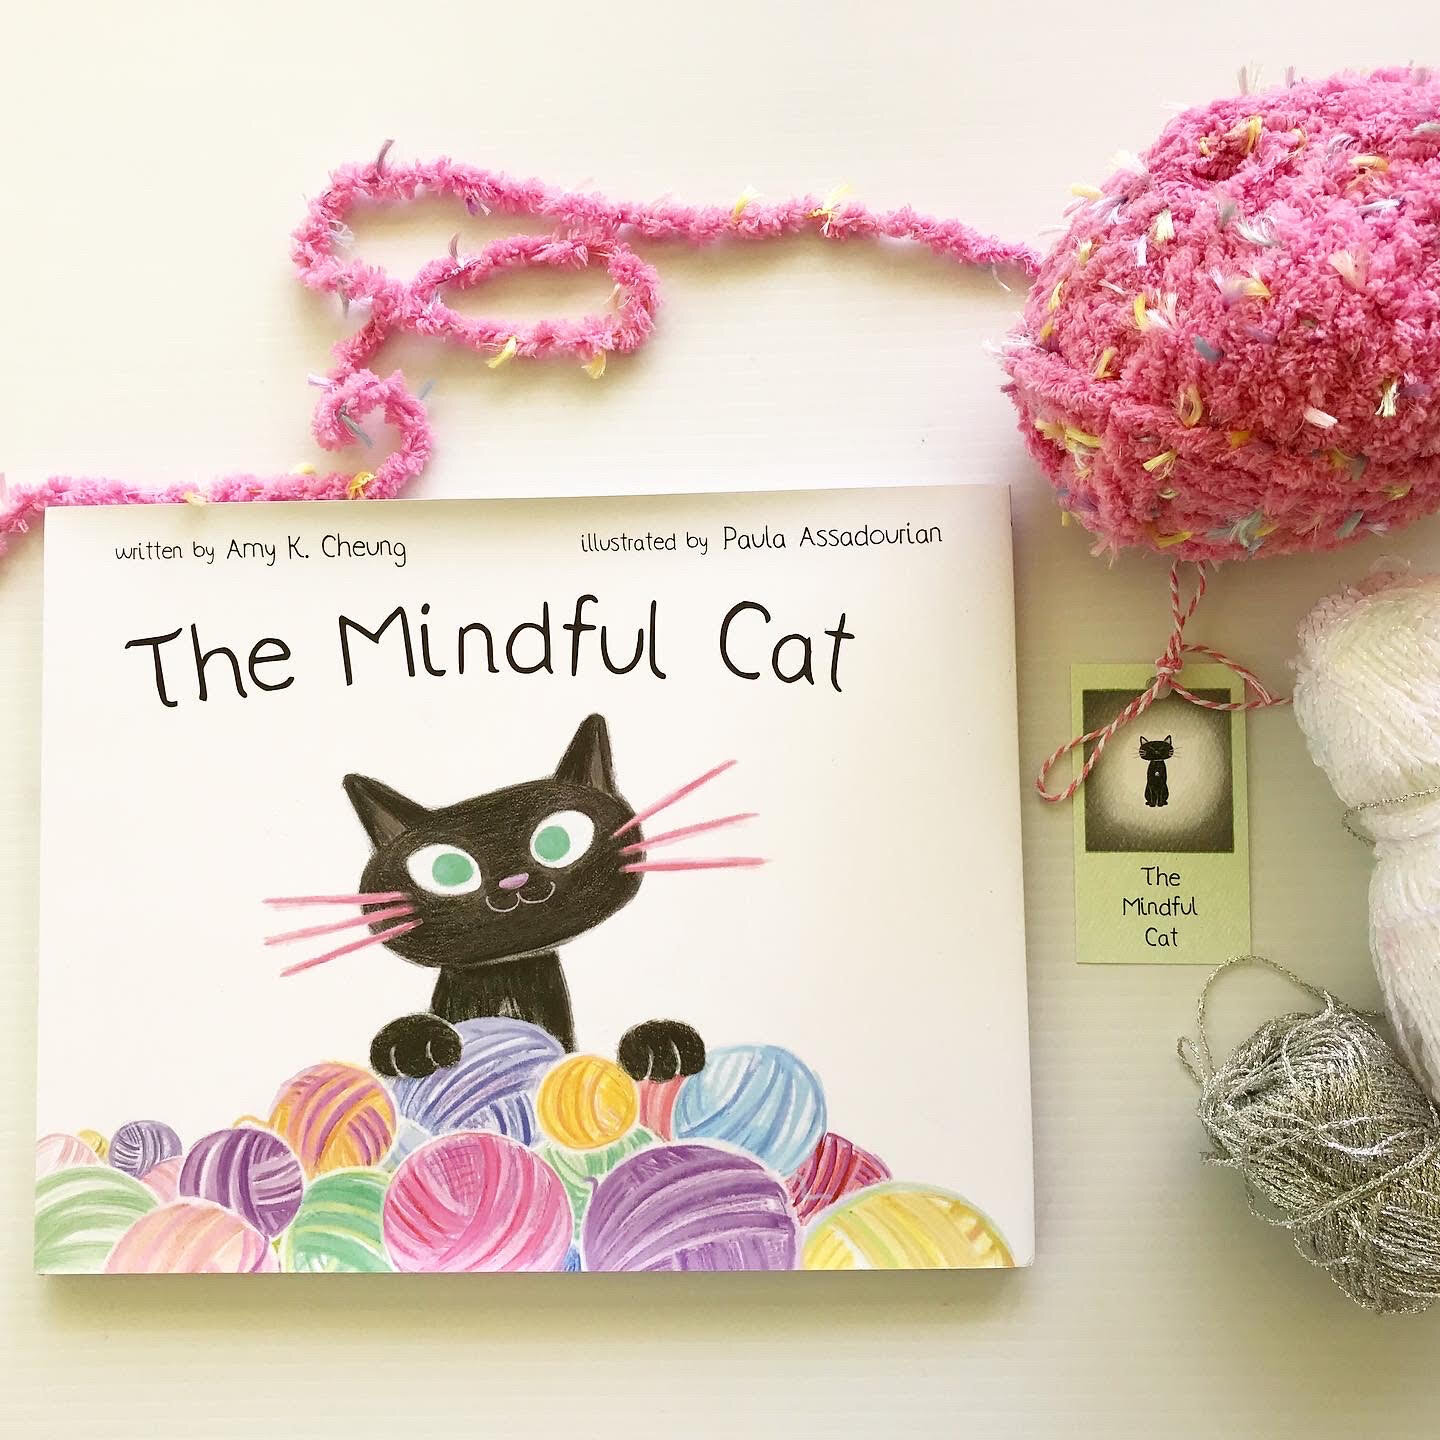 The Mindful Cat Book Available Now! — The Mindful Cat Book